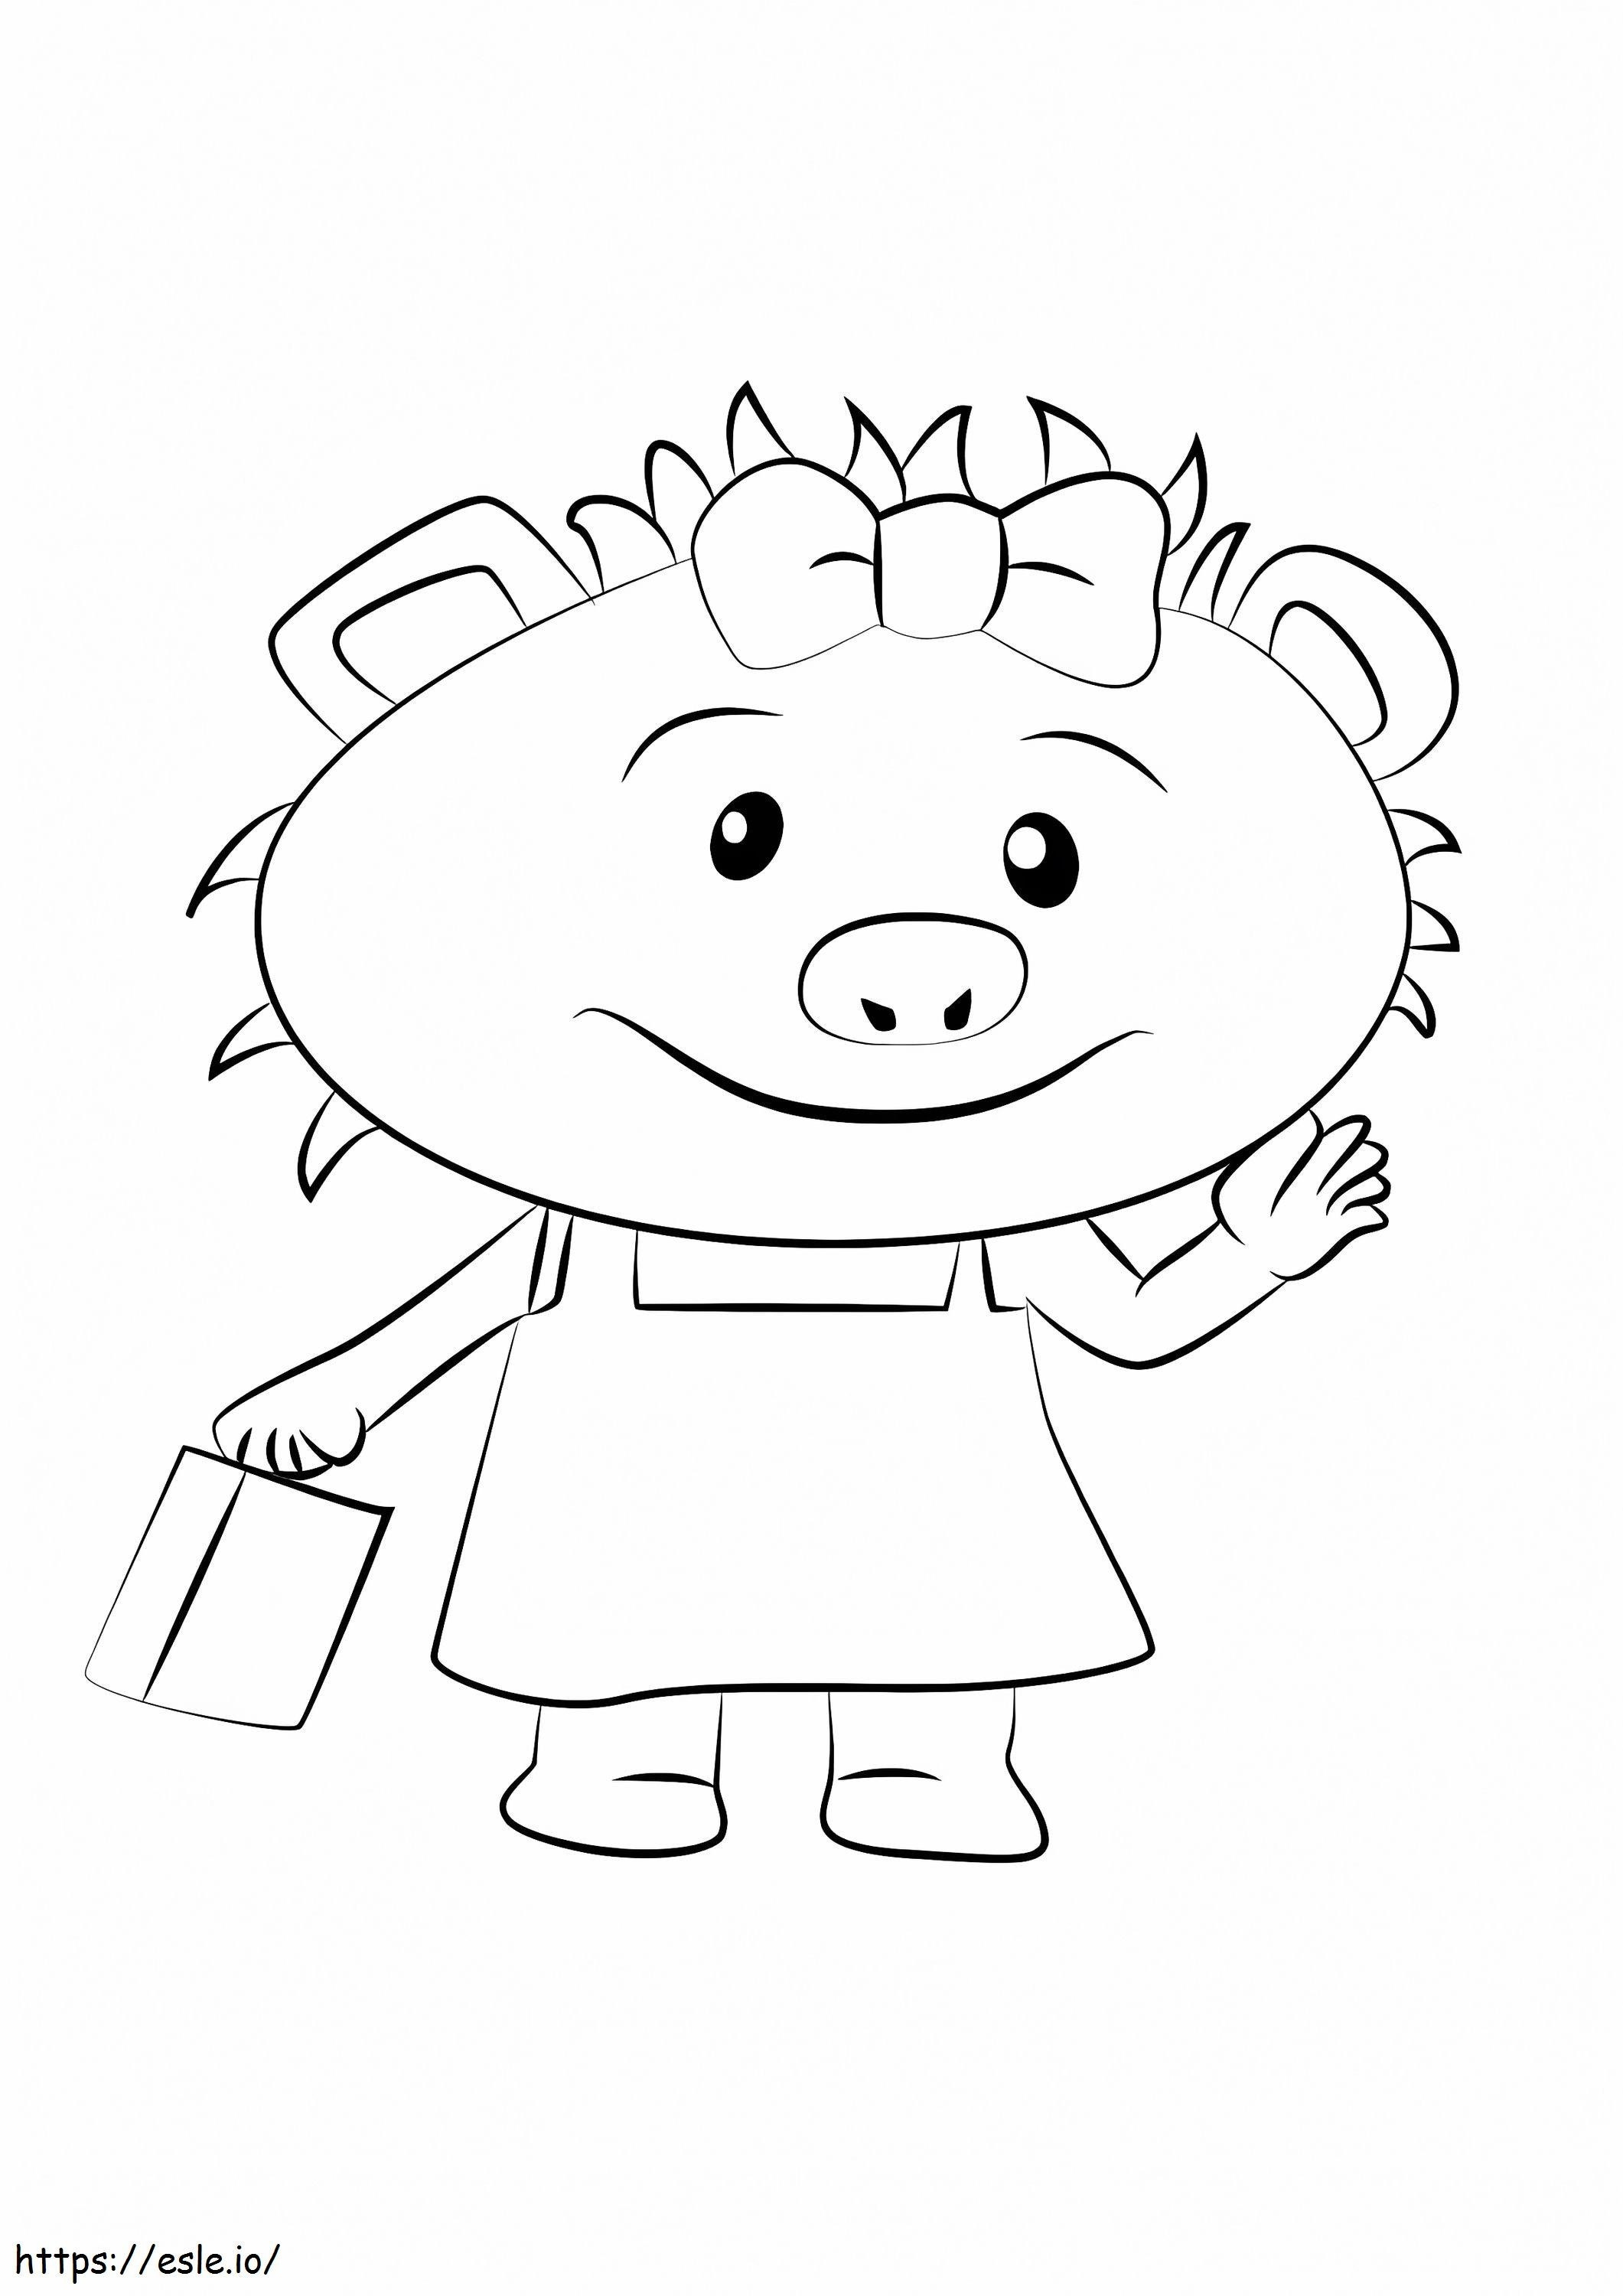 Polly May Porcupine coloring page